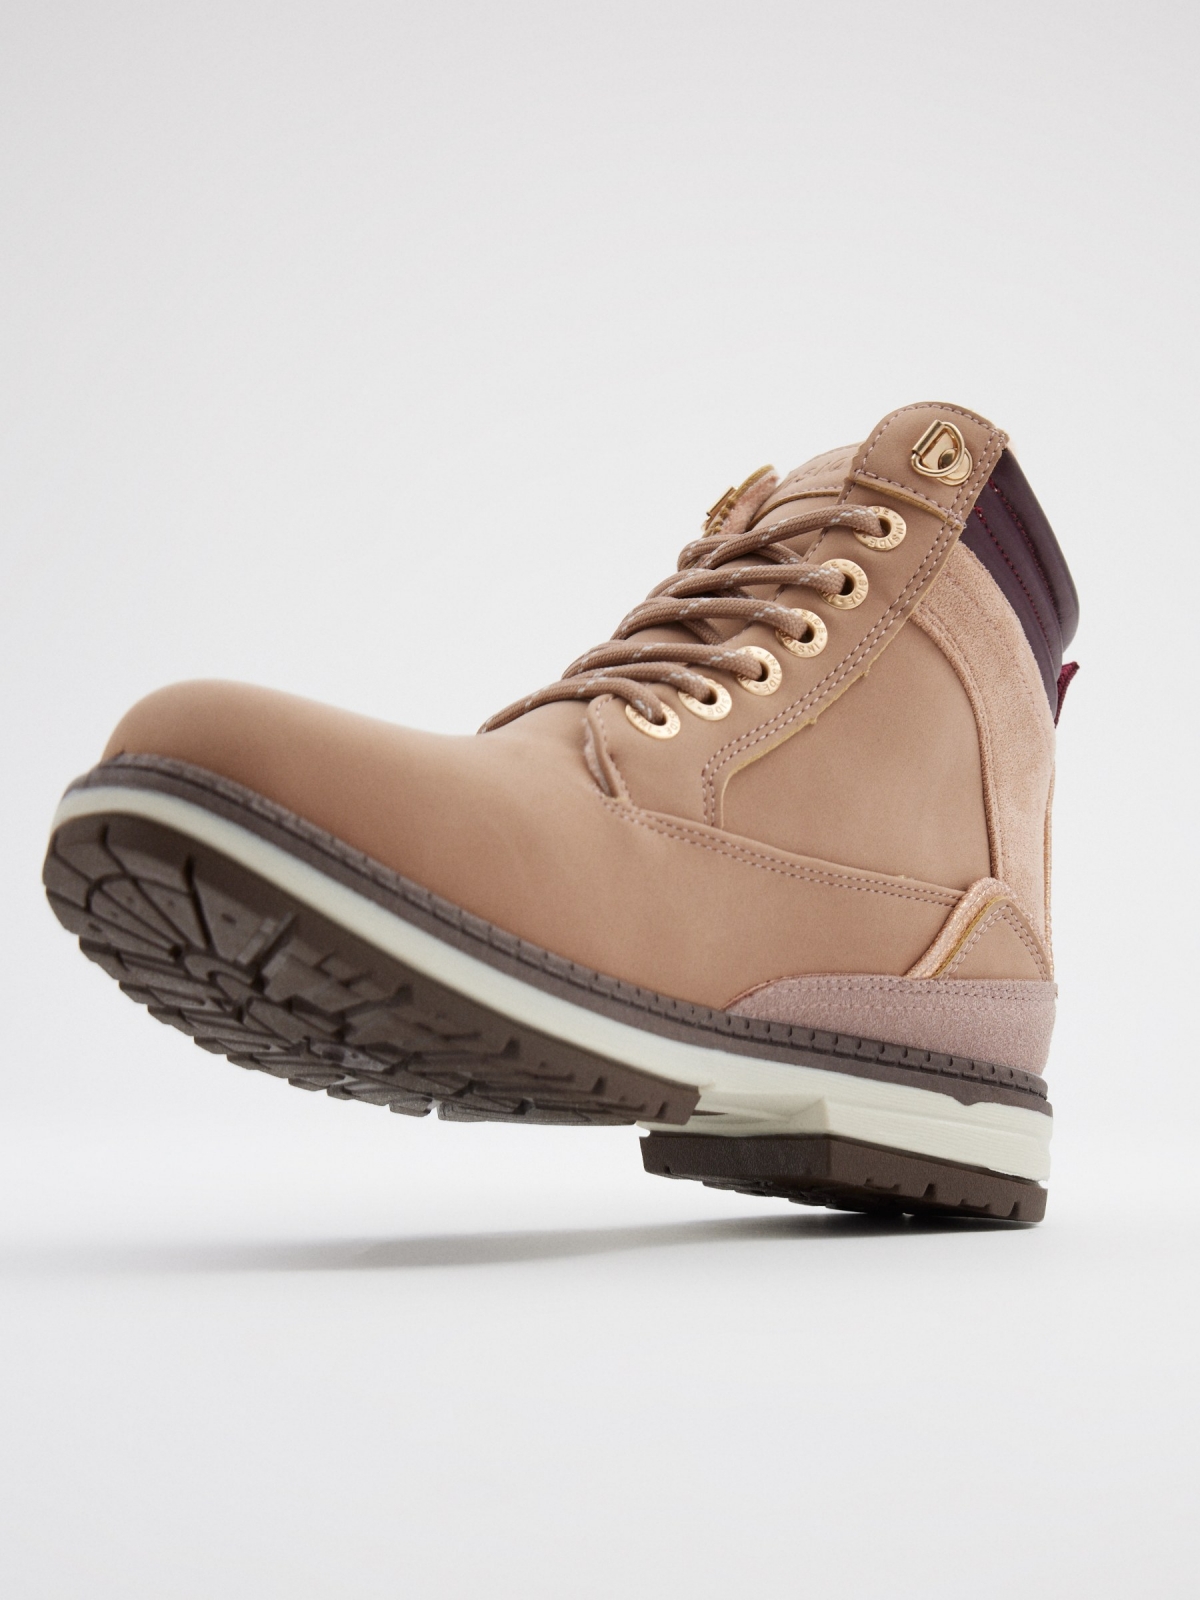 Camel mountain style boot pink detail view